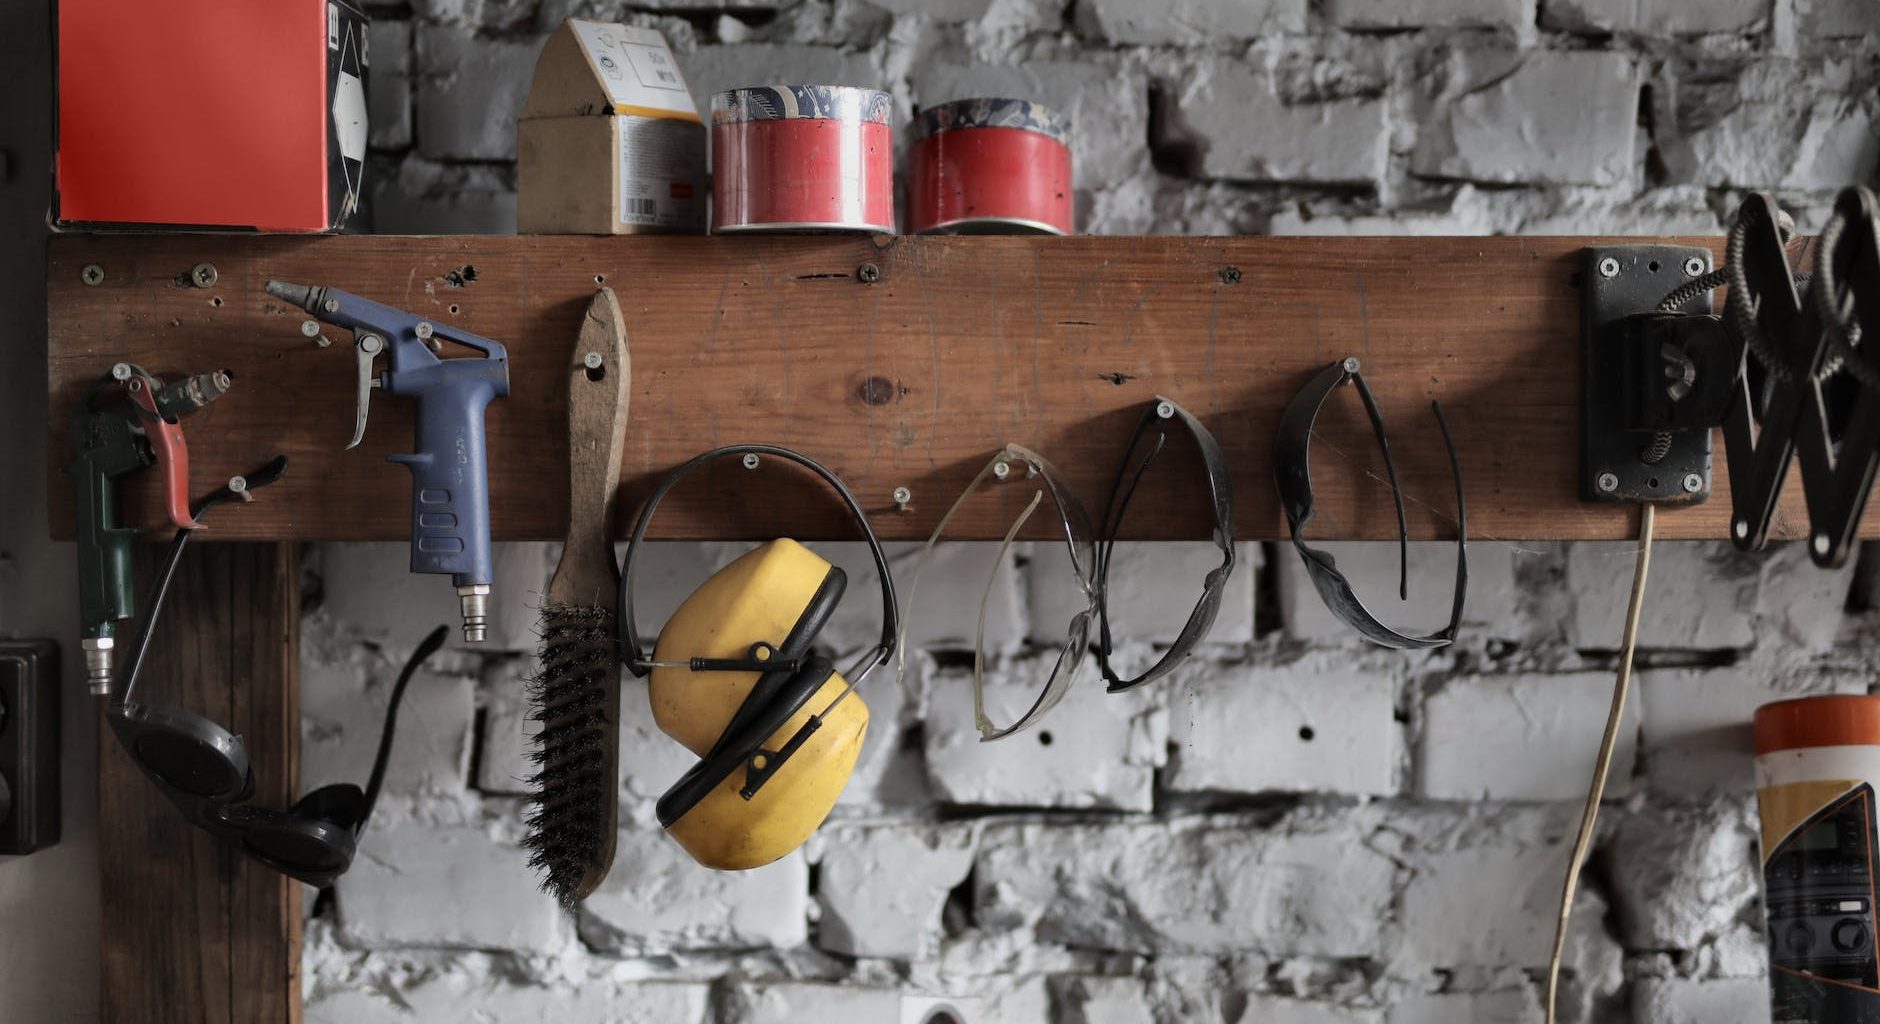 various instruments hanging on wooden board in garage